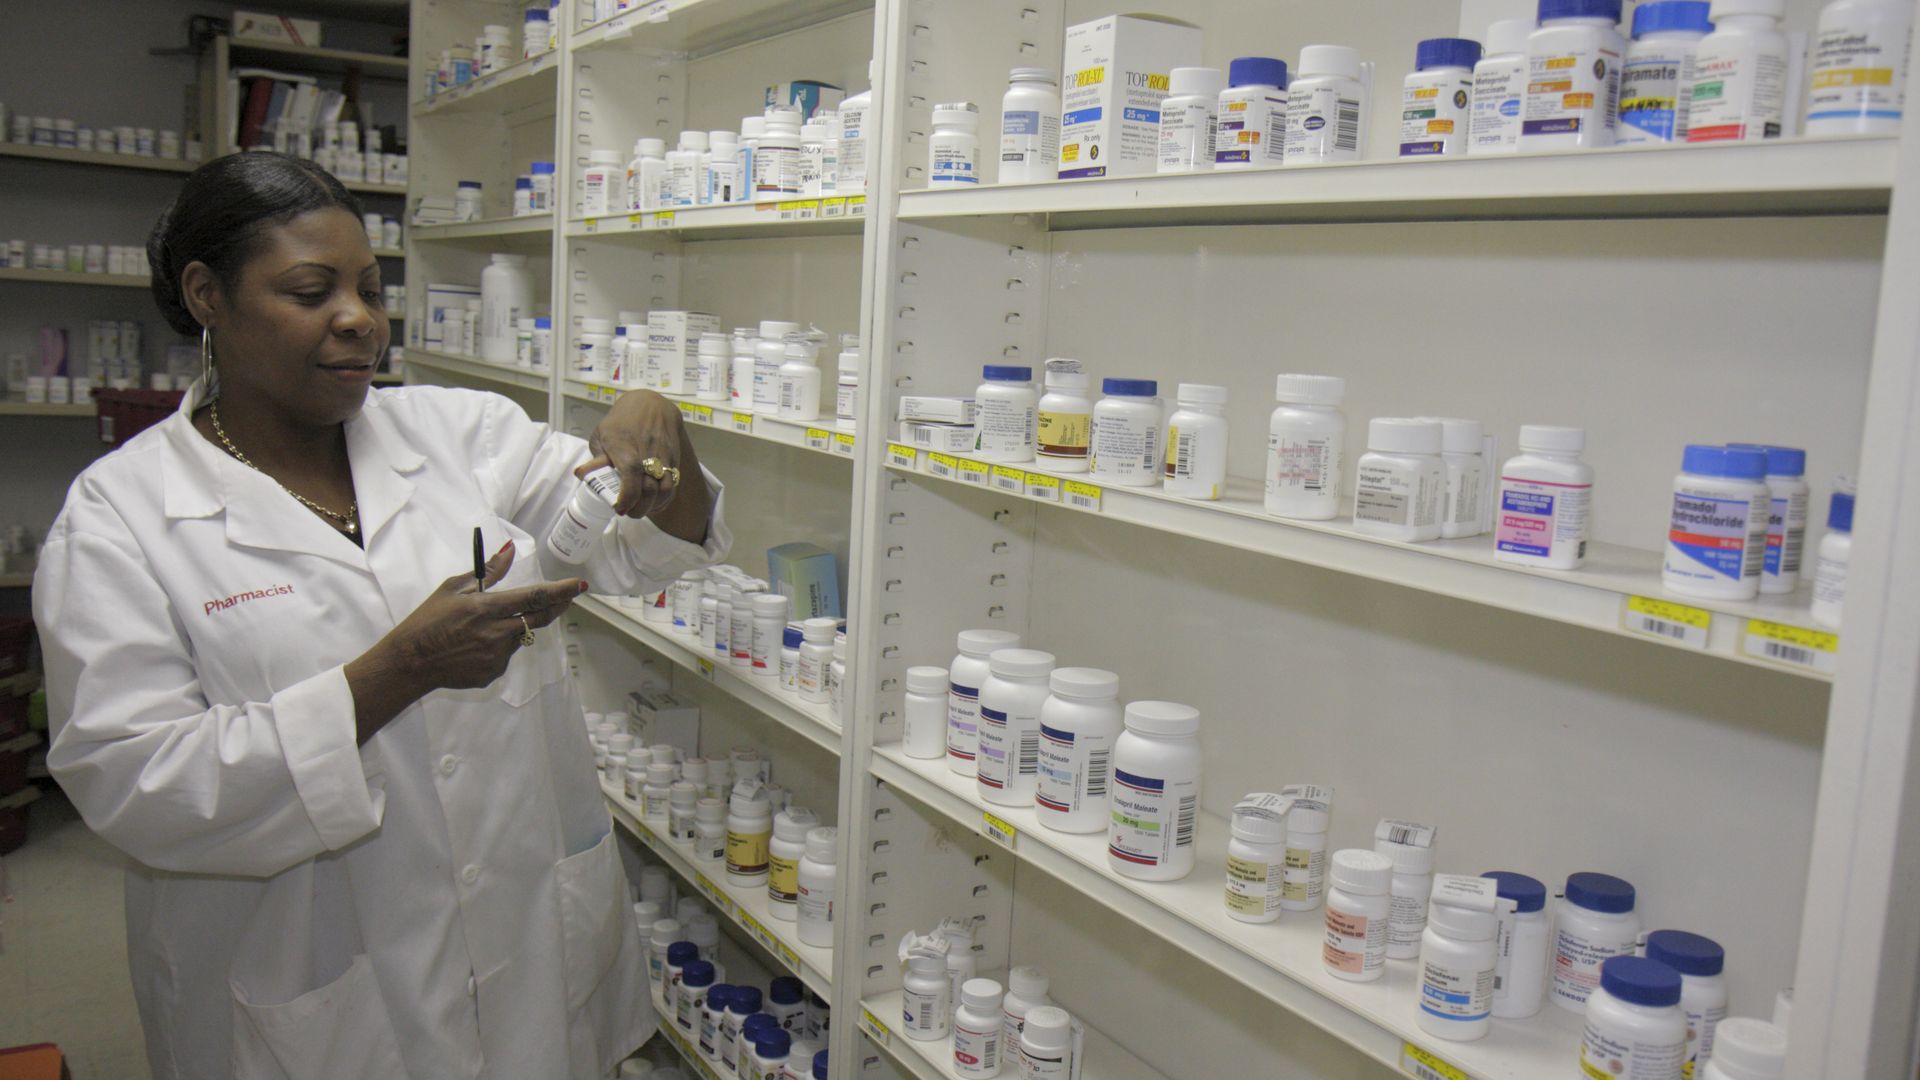 A pharmacist looks at medication bottles in a pharmacy.